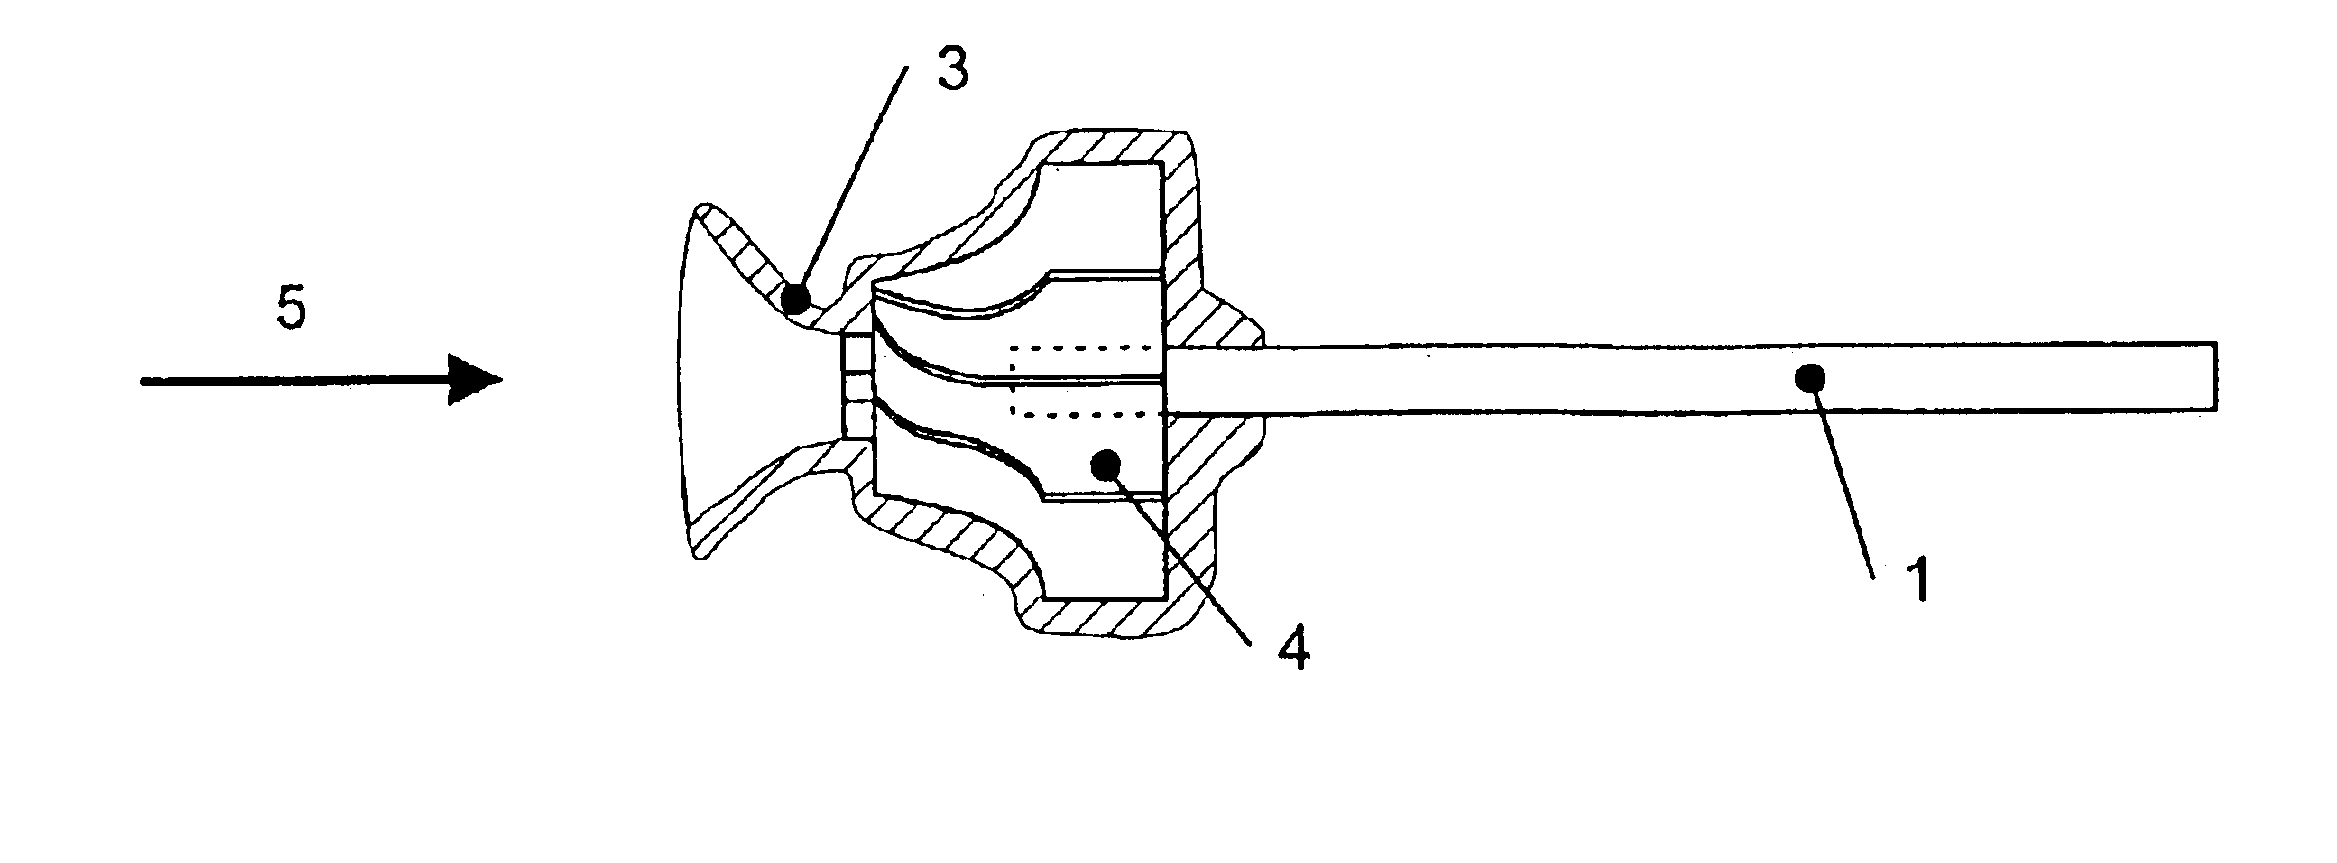 Method for manufacturing a turbine wheel rotor